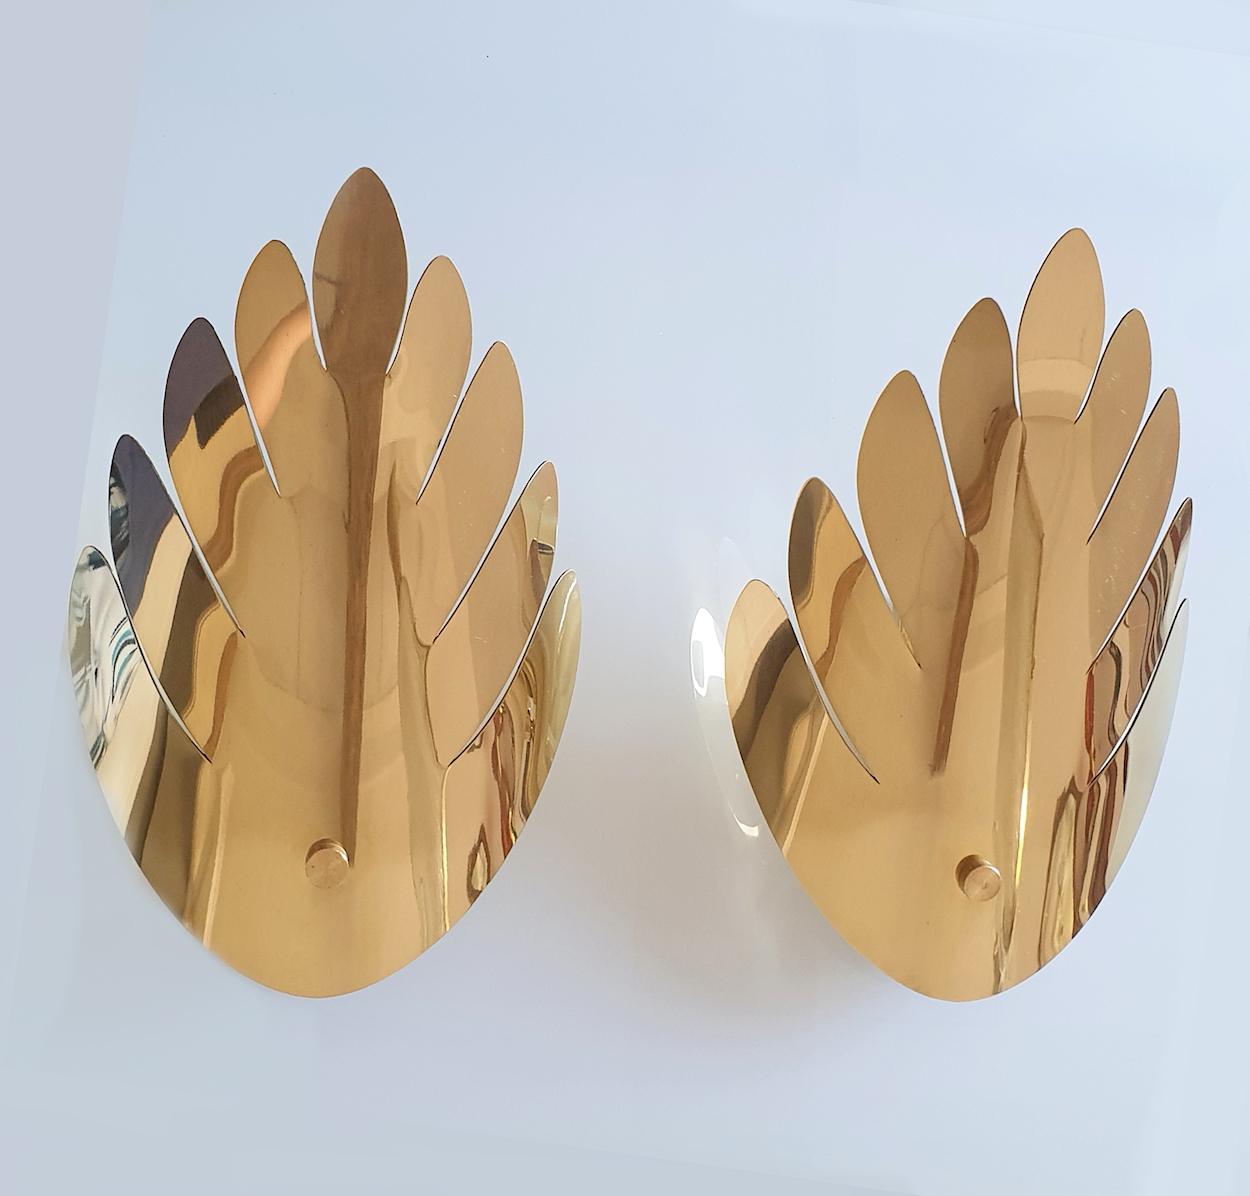 Pair of Mid-Century Modern brass wall sconces, in the style of Maison Jansen, France, 1970s
The brass sconces have 1-light each, and are rewired for the US.
The sconces are made of a brass stylized curved leaf and brass mounts.
In excellent